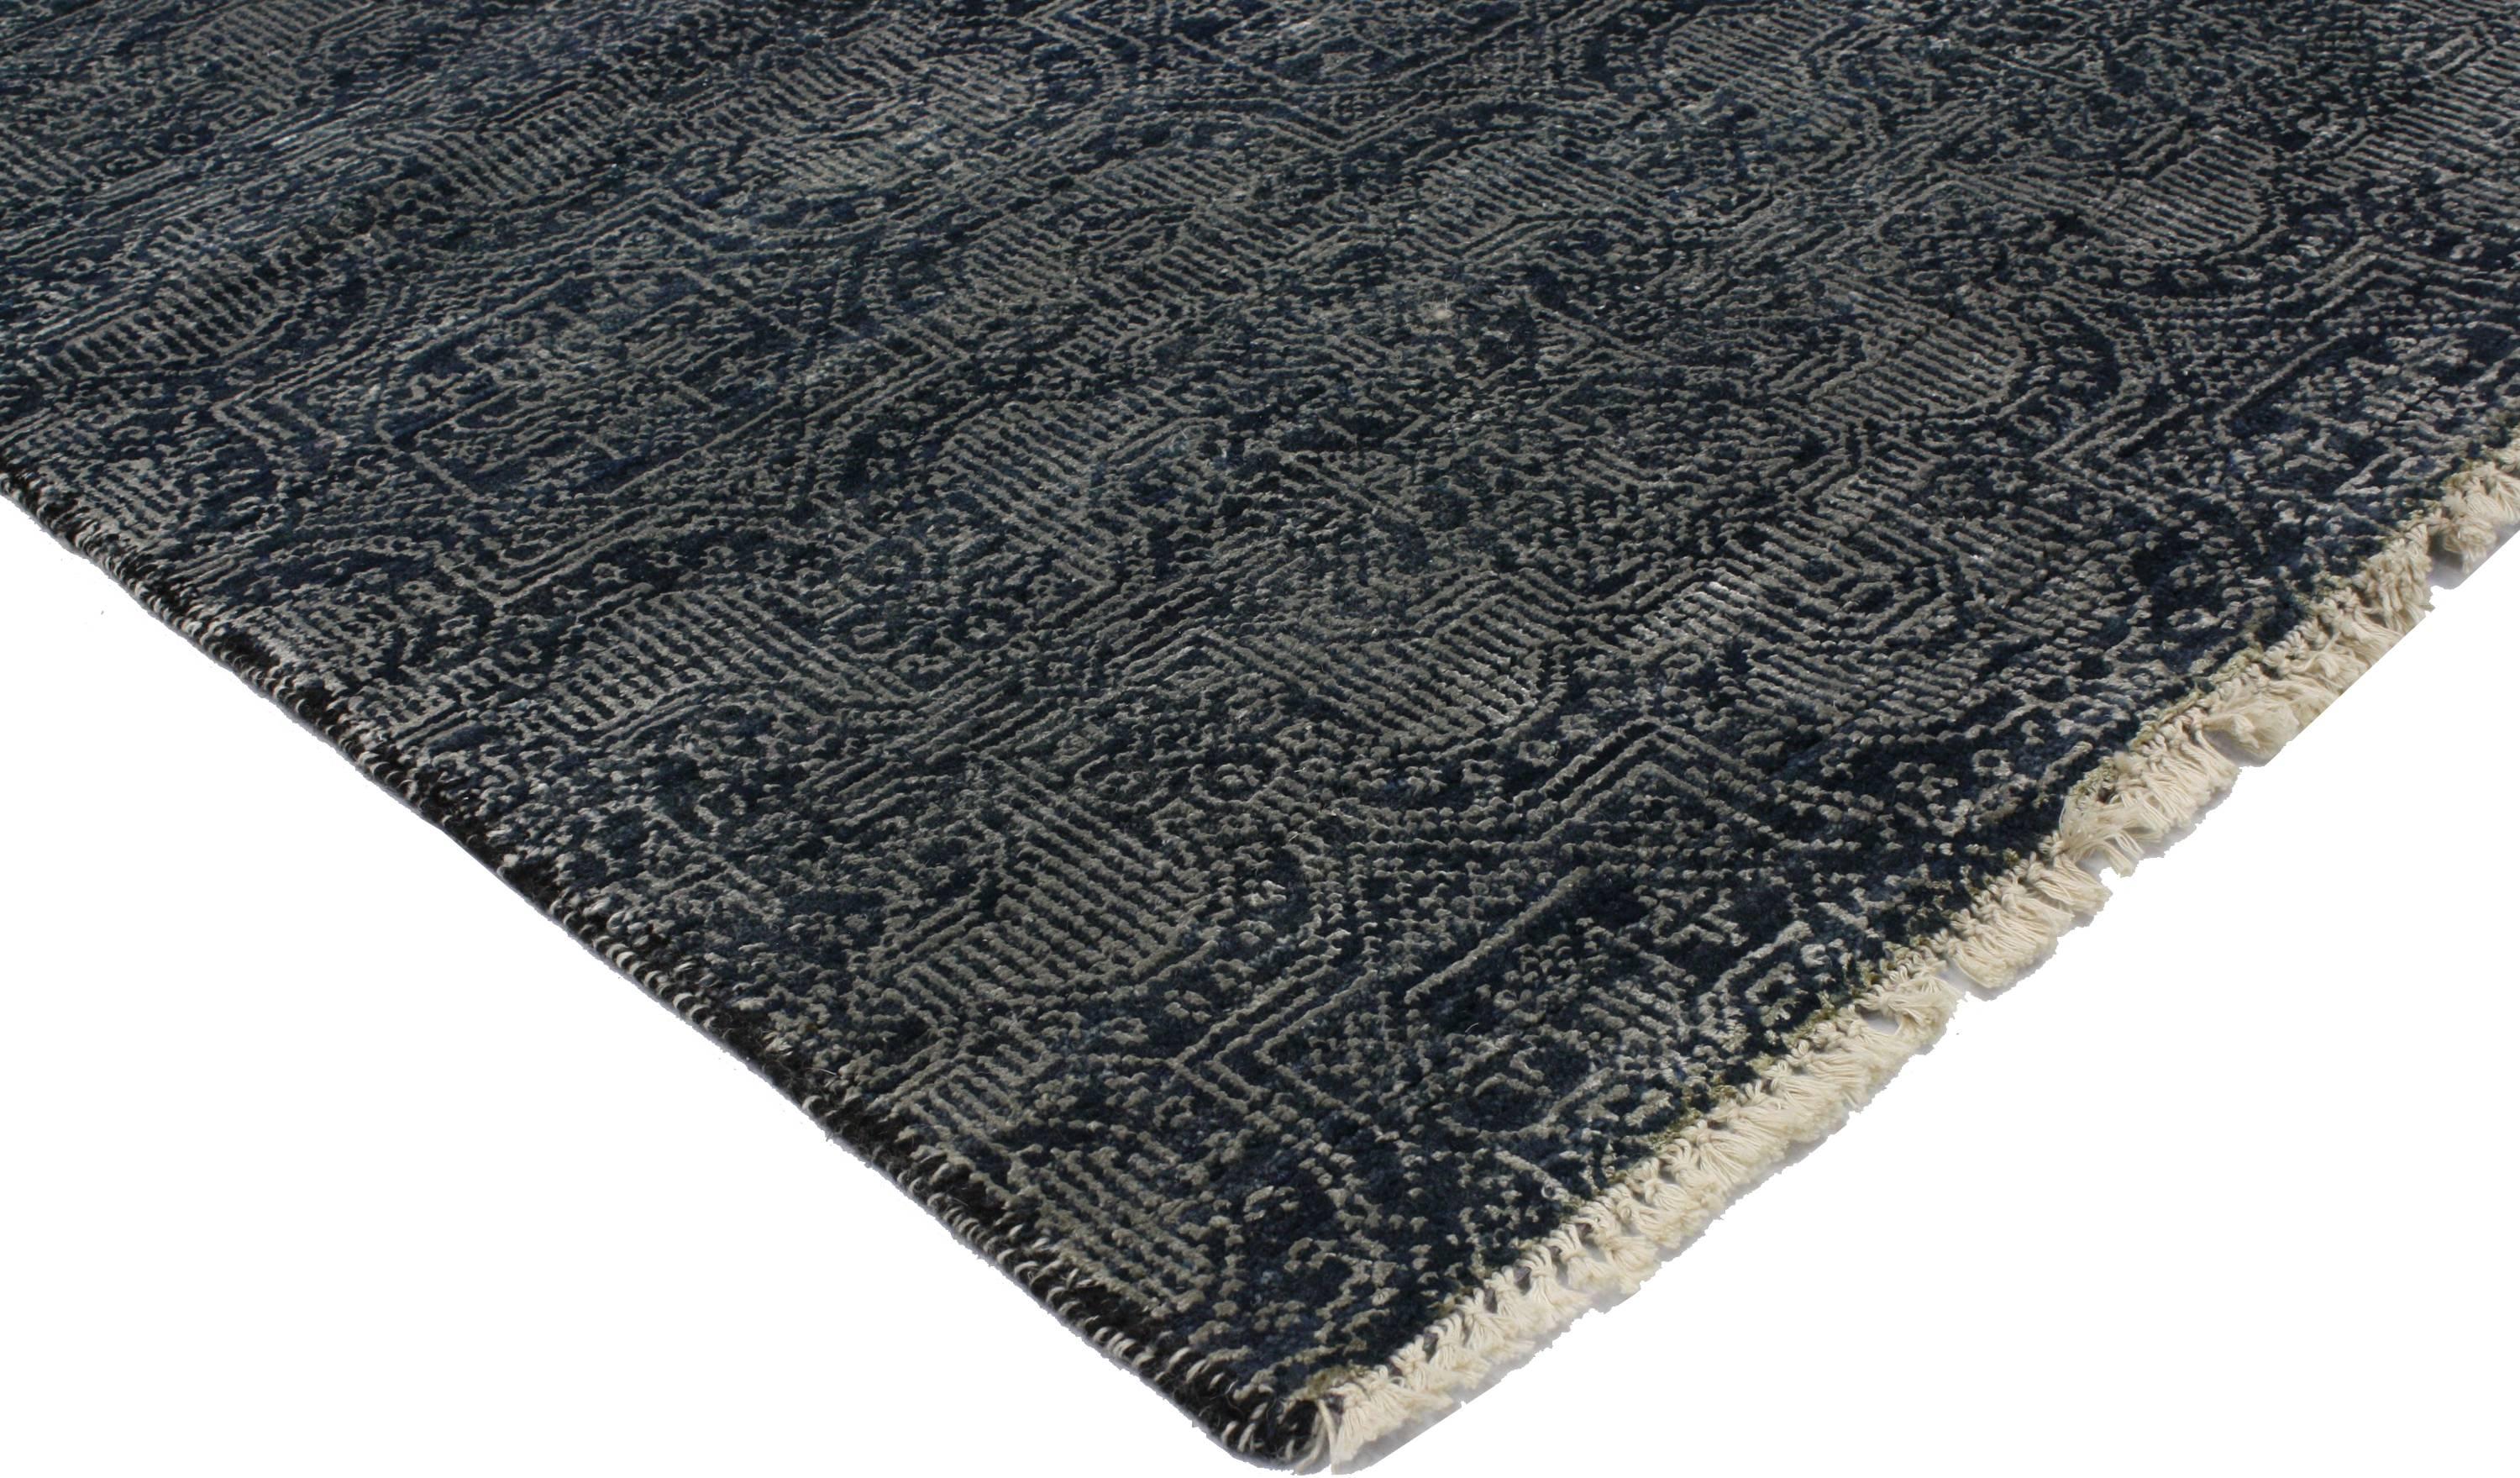 30283 New Transitional Modern Runner, Midnight Navy Blue Hallway Runner. Infuse your room with the curvaceous, exotic arabesque pattern highlighted in this transitional navy blue hallway runner. Enhanced by its mesmerizing shades of navy blue and